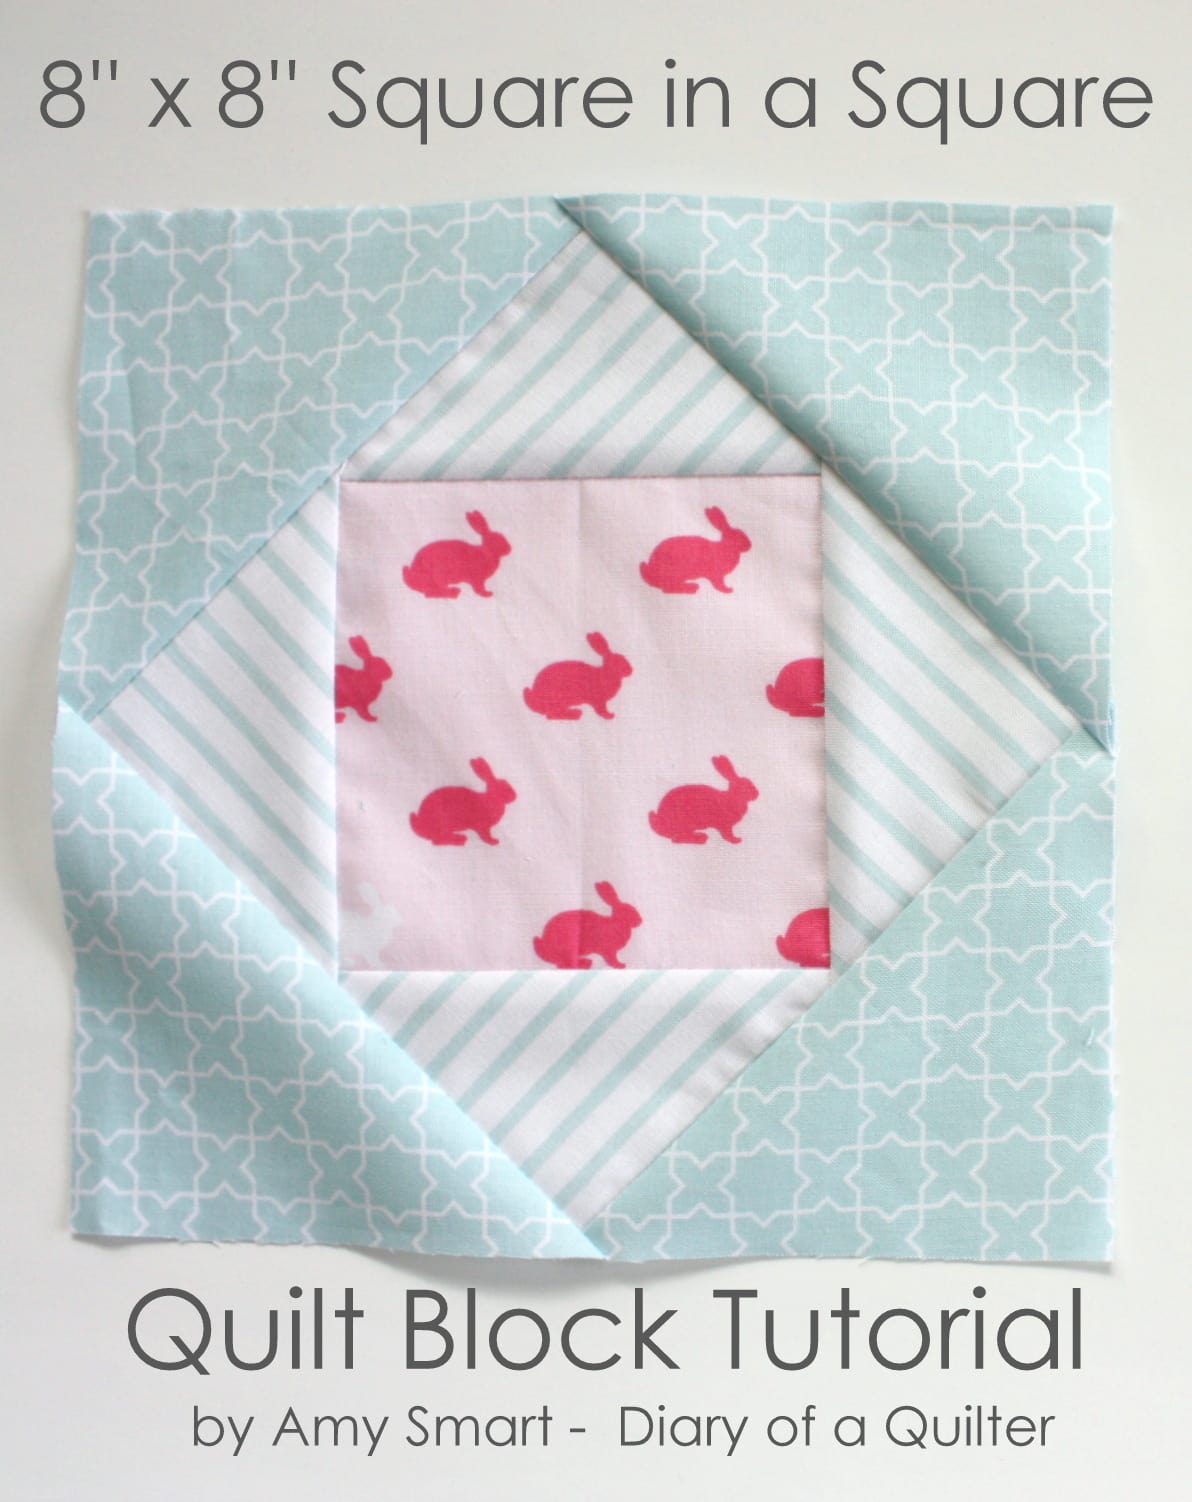 Square in Square Mini Quilt Tutorial by Amy Smart of Diary of a Quilter